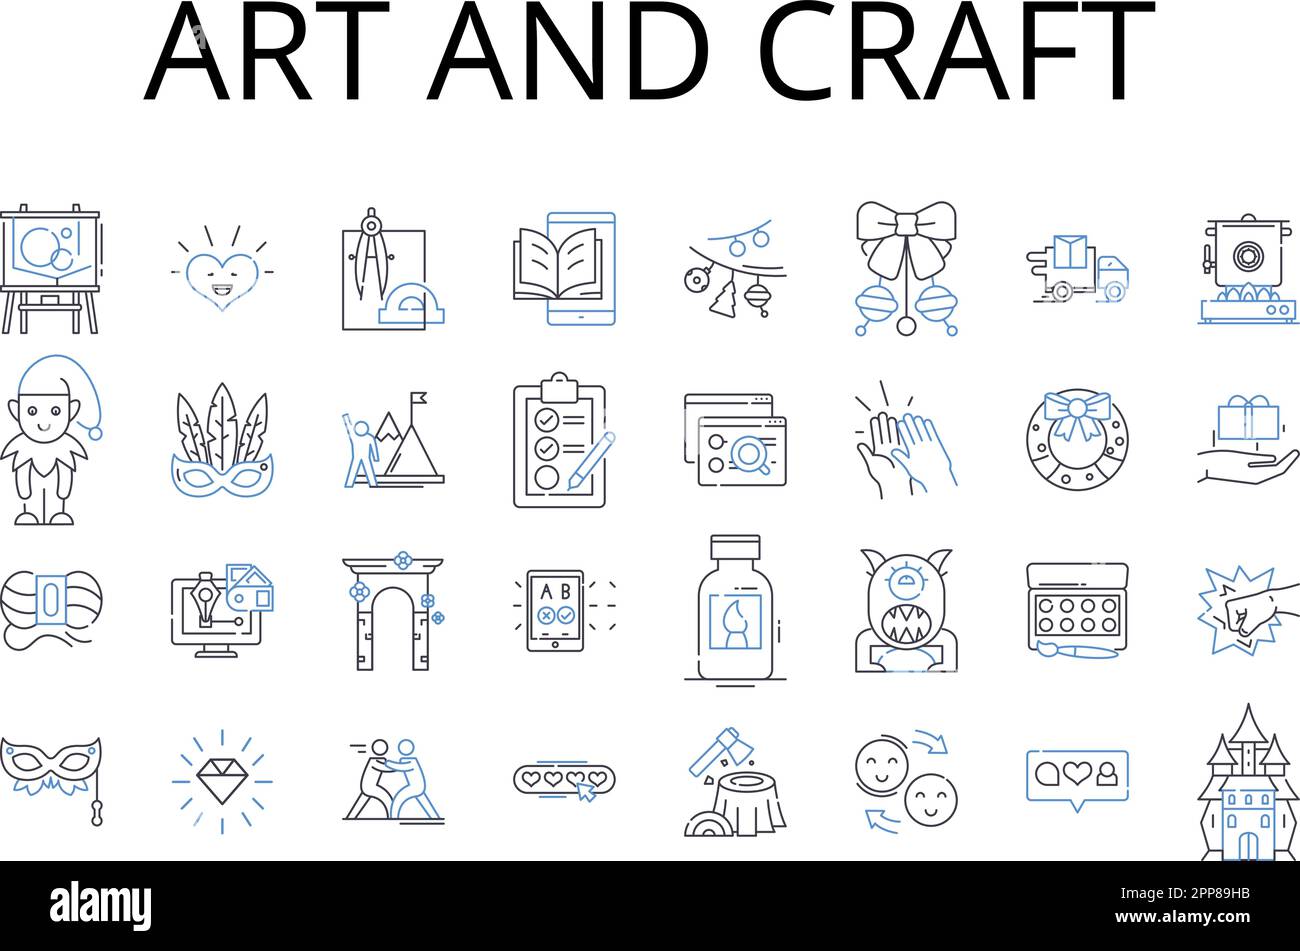 Art and craft line icons collection. Handiwork, Creation, Design, Skill, Technique, Talent, Creativity vector and linear illustration. Workmanship Stock Vector